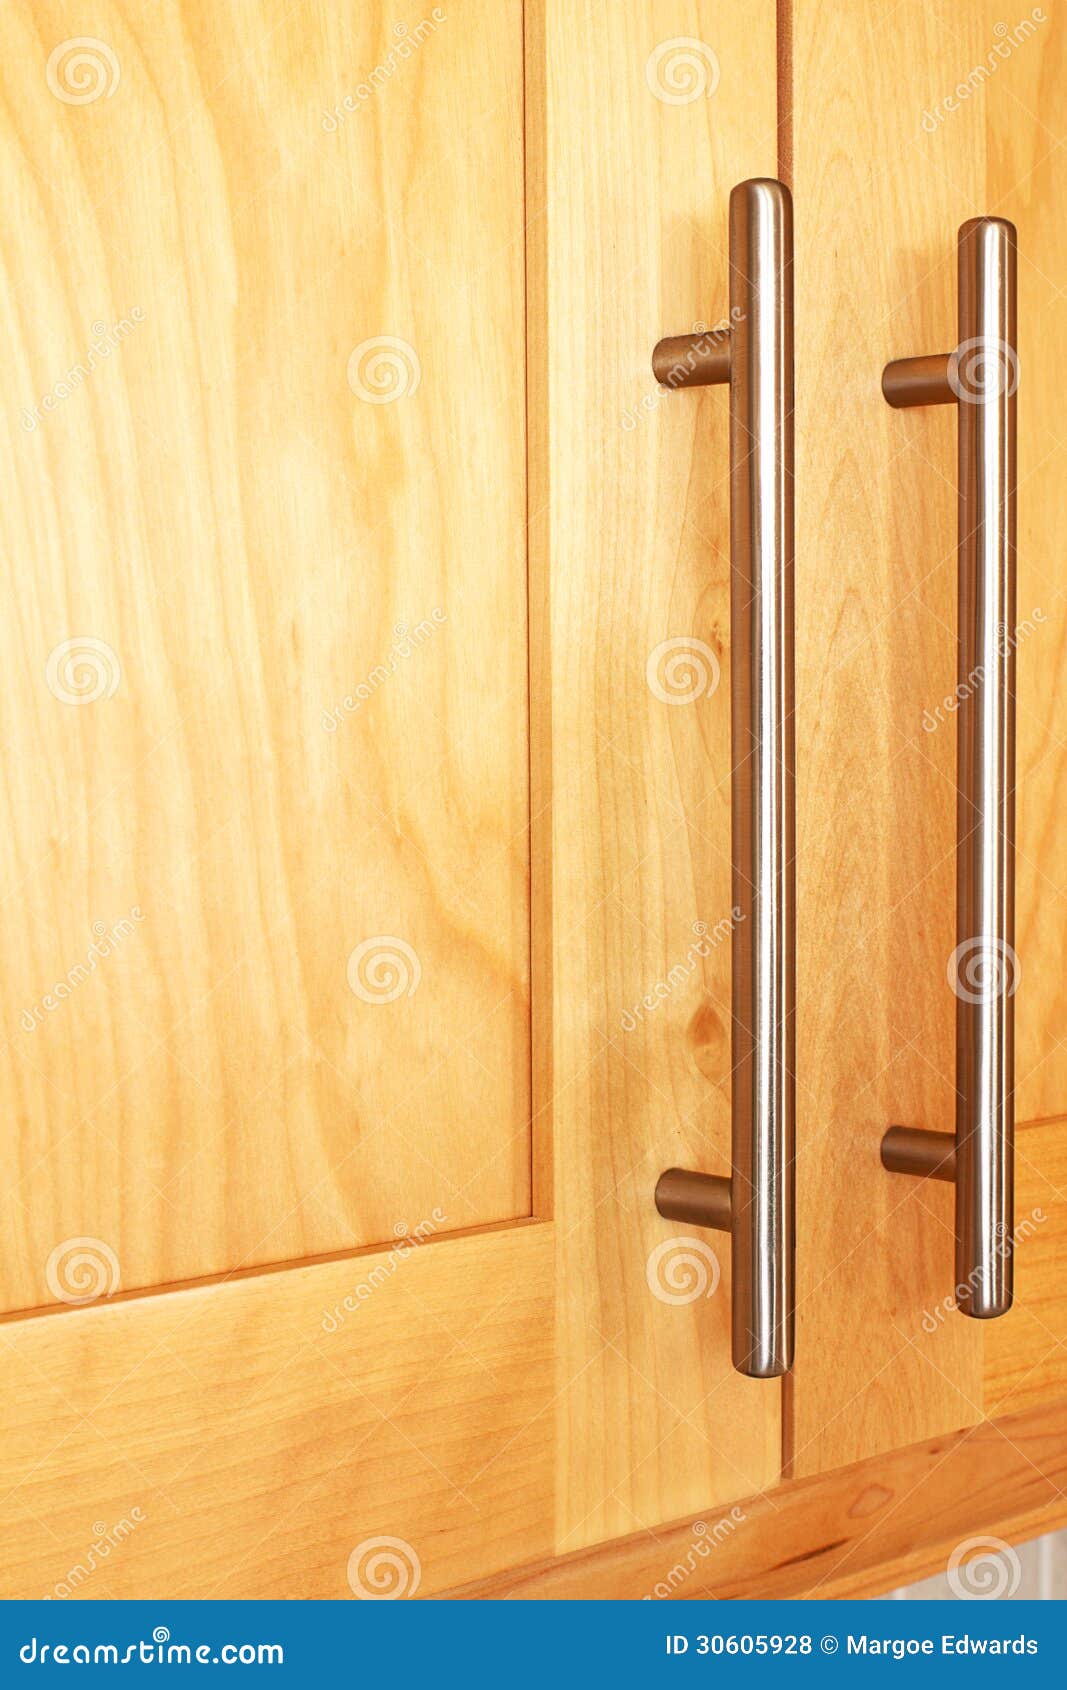 Cupboard handles stock photo. Image of home, interior - 30605928